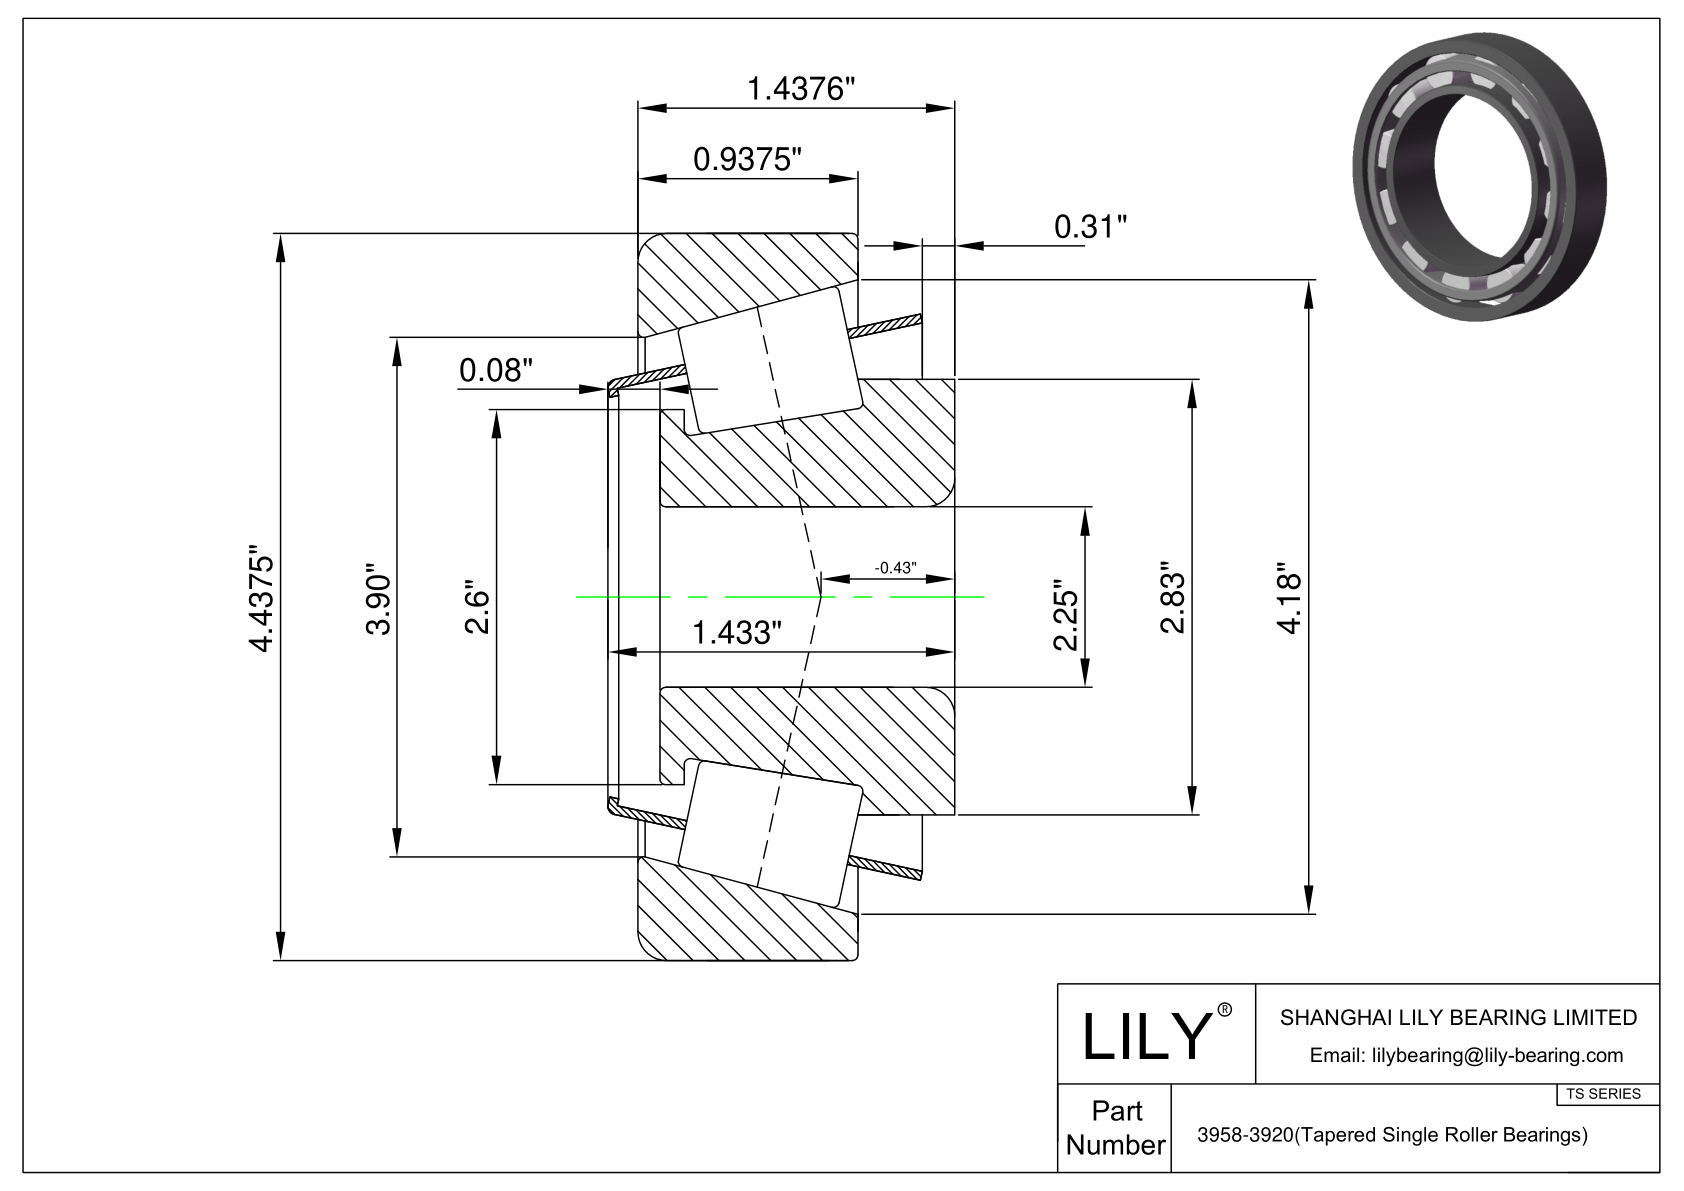 3958-3920 TS (Tapered Single Roller Bearings) (Imperial) cad drawing